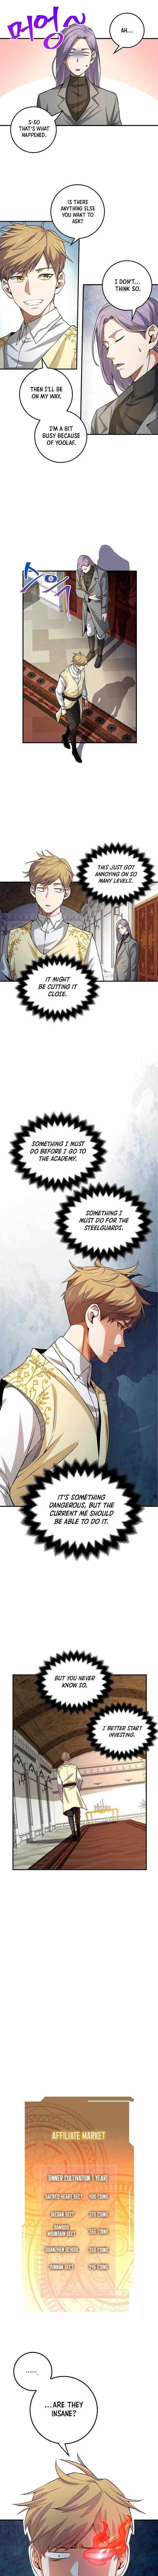 The Lords Coins Arent Decreasing Chapter 19 Page 4